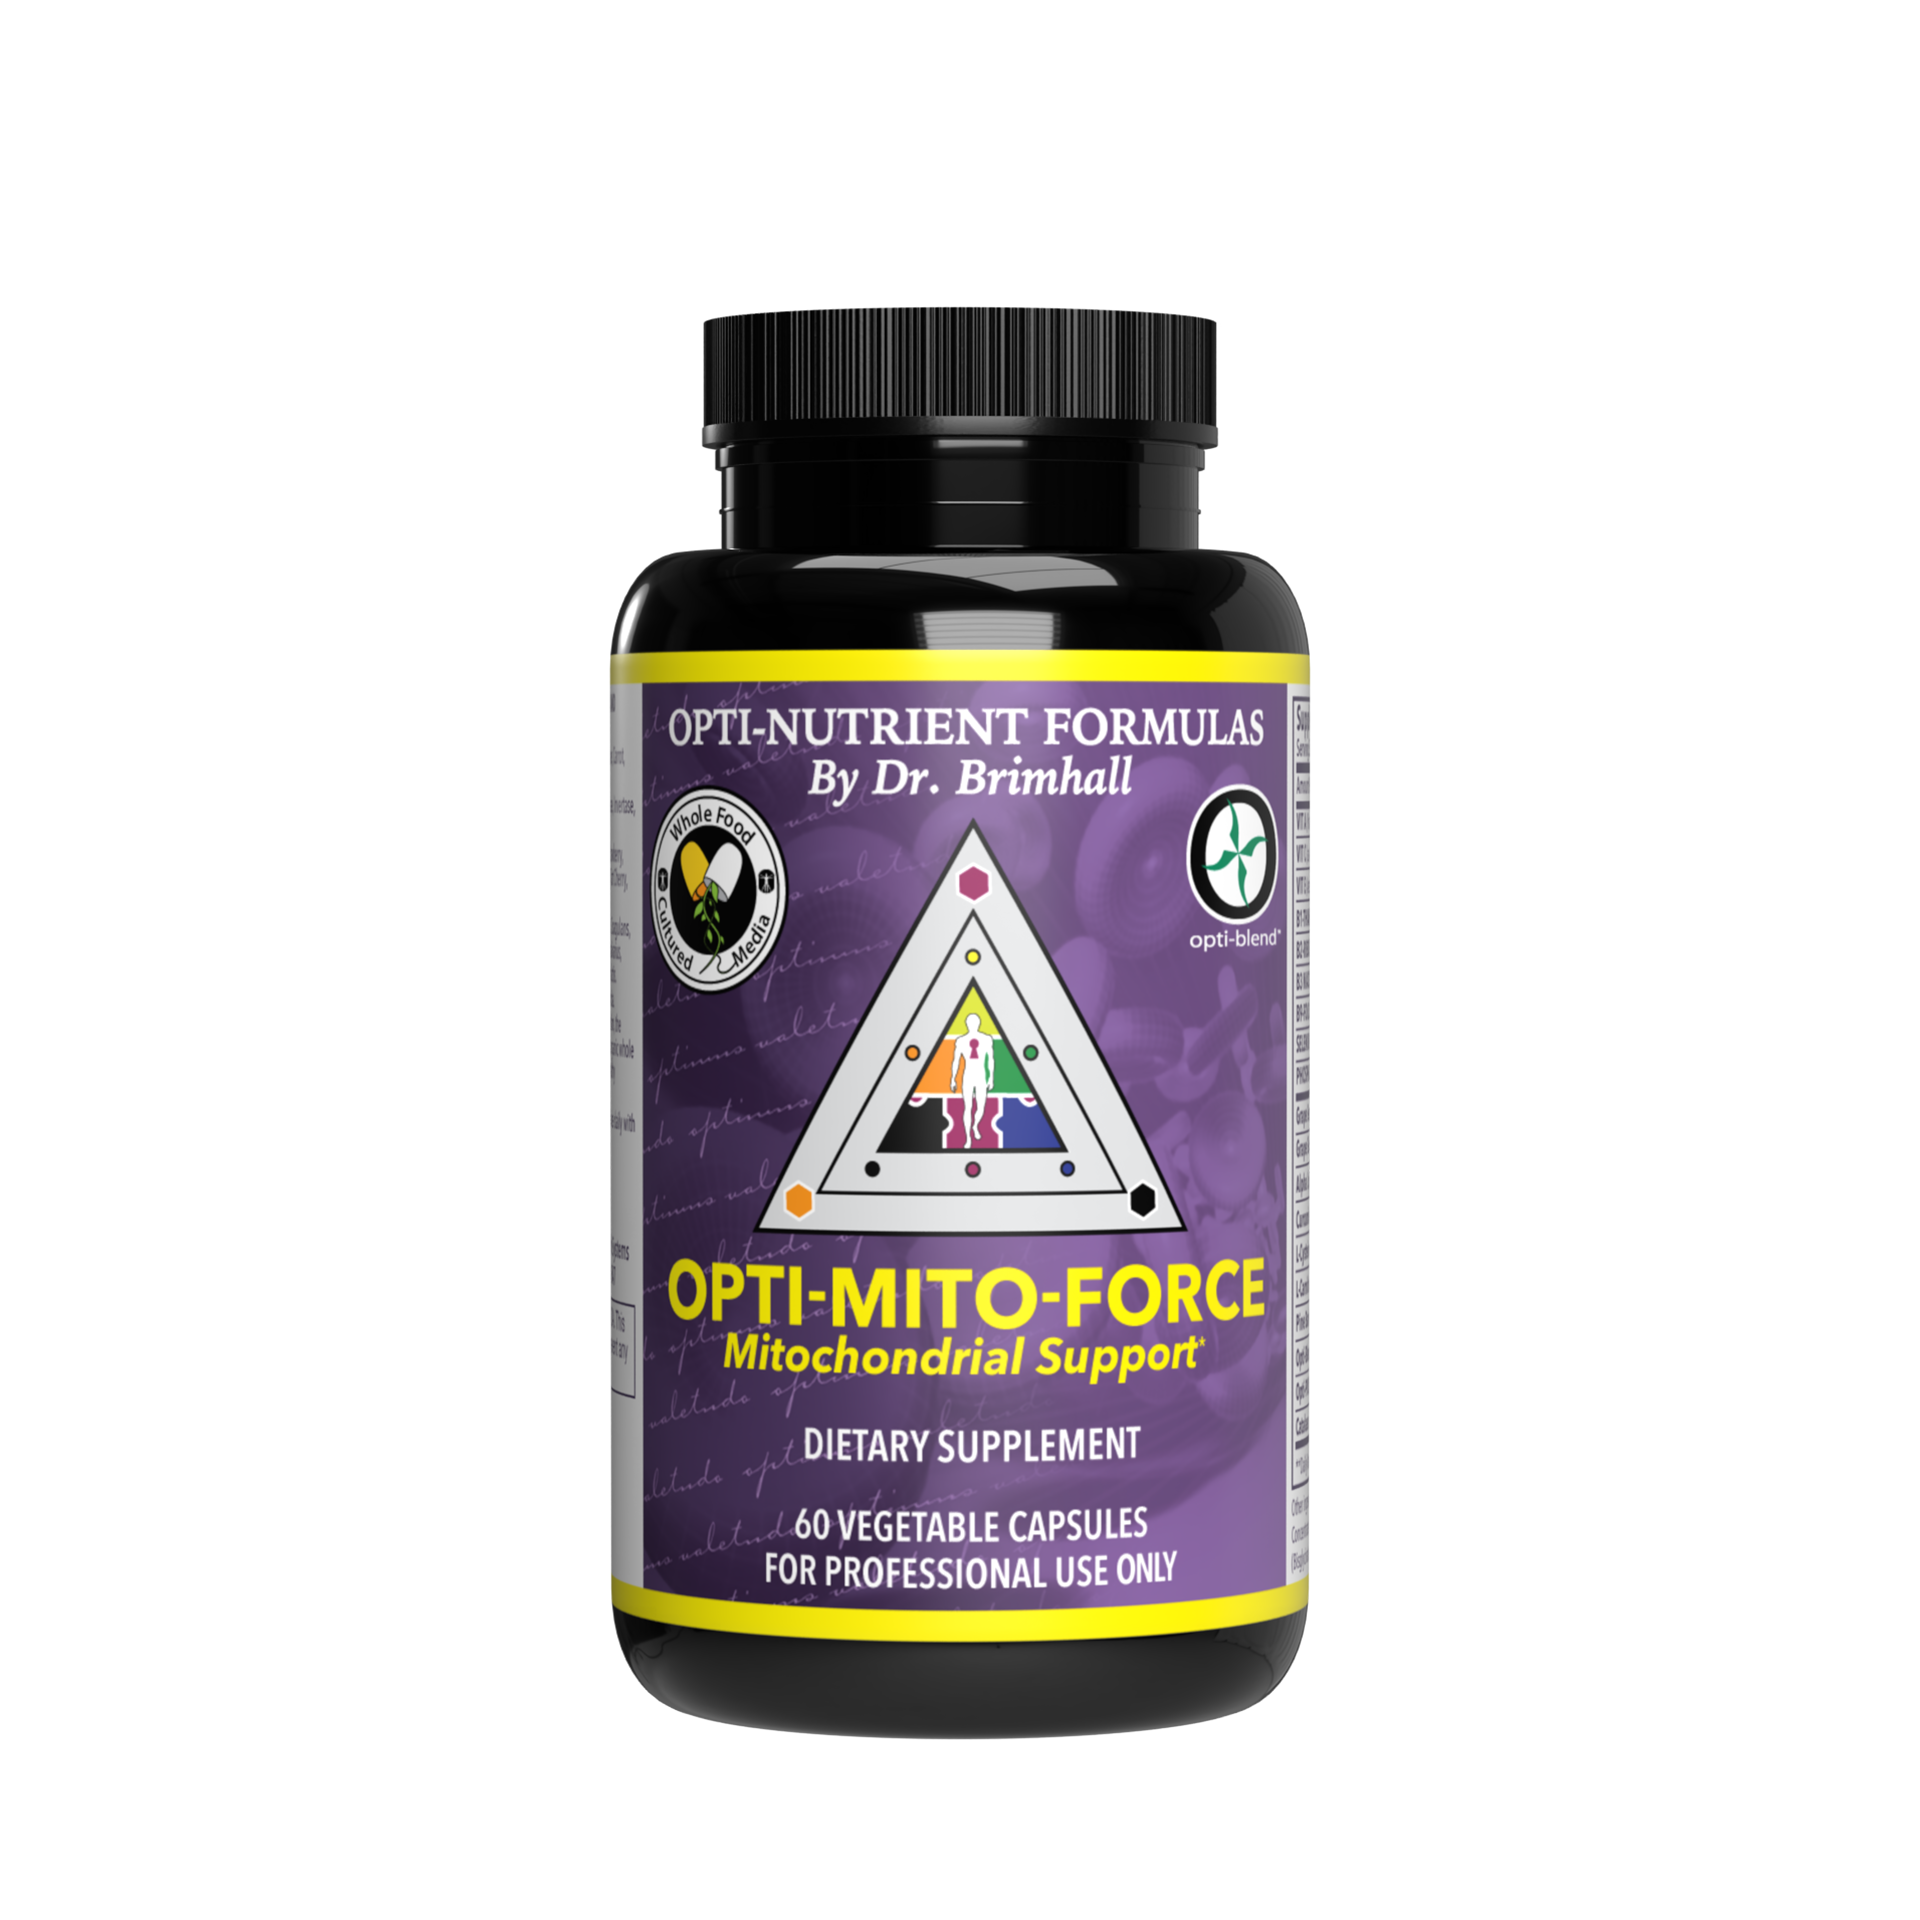 Image of a bottle of Opti-Nutrients Opti-Mito-Force.